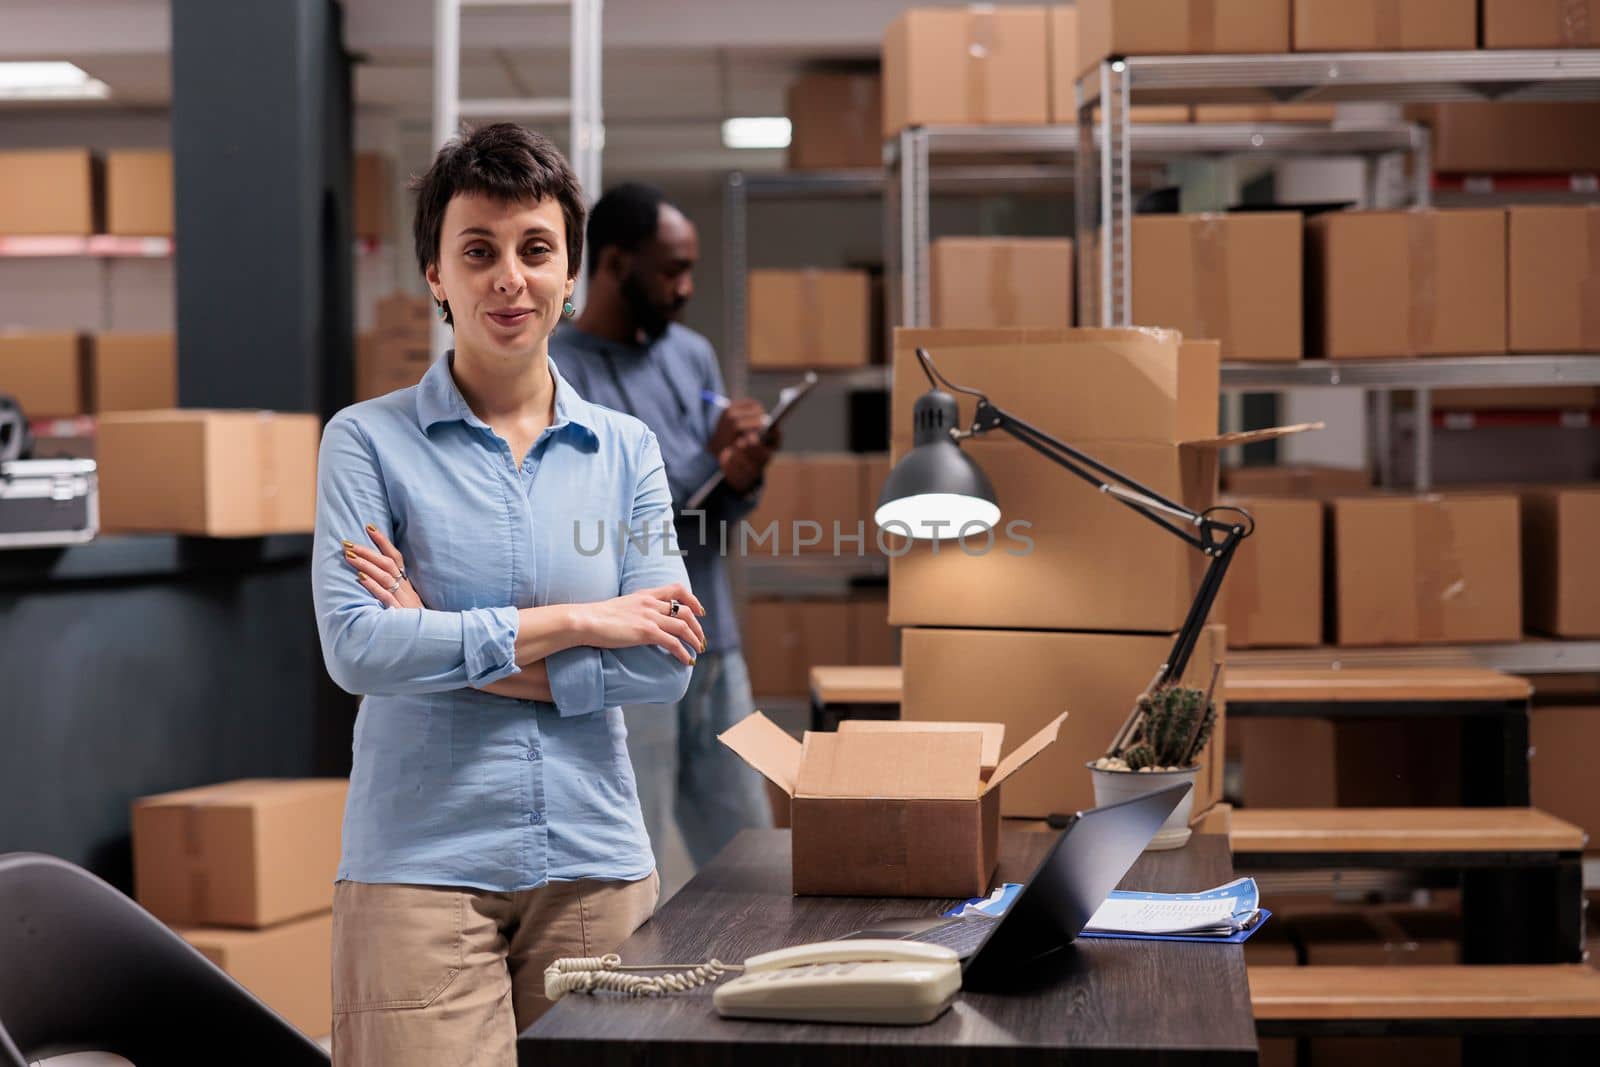 Warehouse manager standing in delivery department with arm crossed after finishing packing clients orders preparing packages for shipping. Diverse team working distribution center fulfillment company